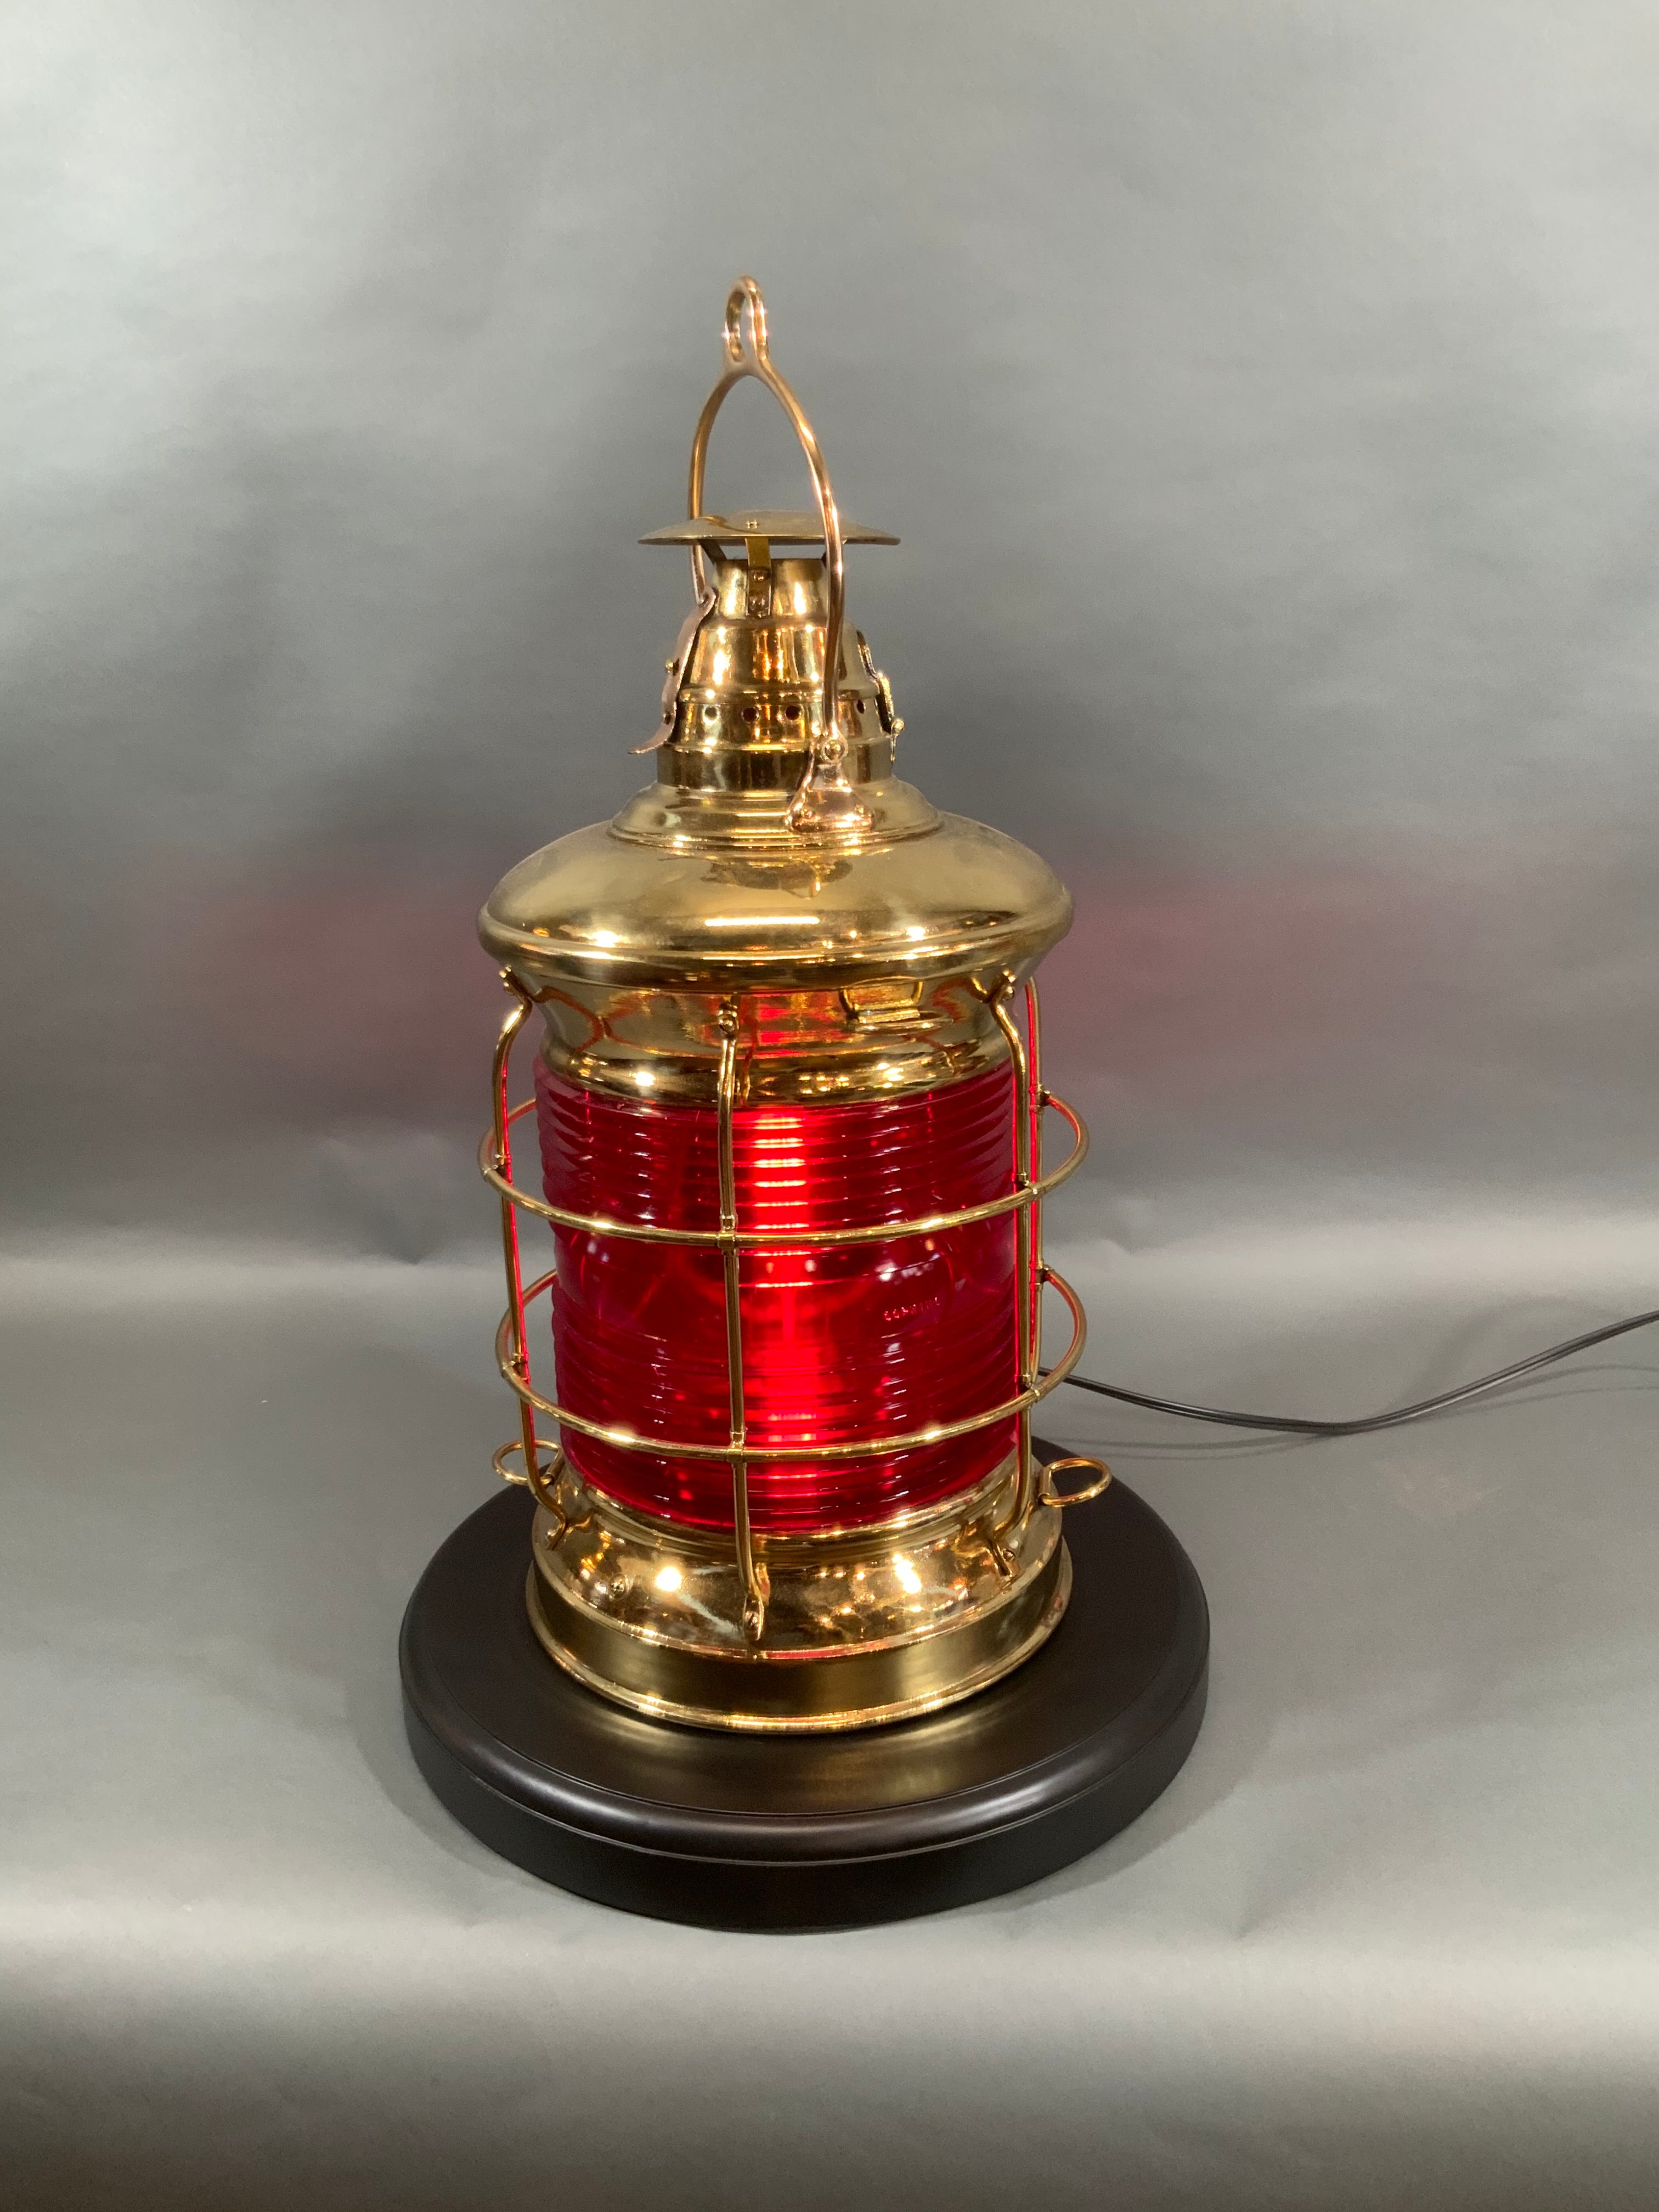 Solid Brass Ship's Lantern by F.H. Lovell Co. of Arlington, New